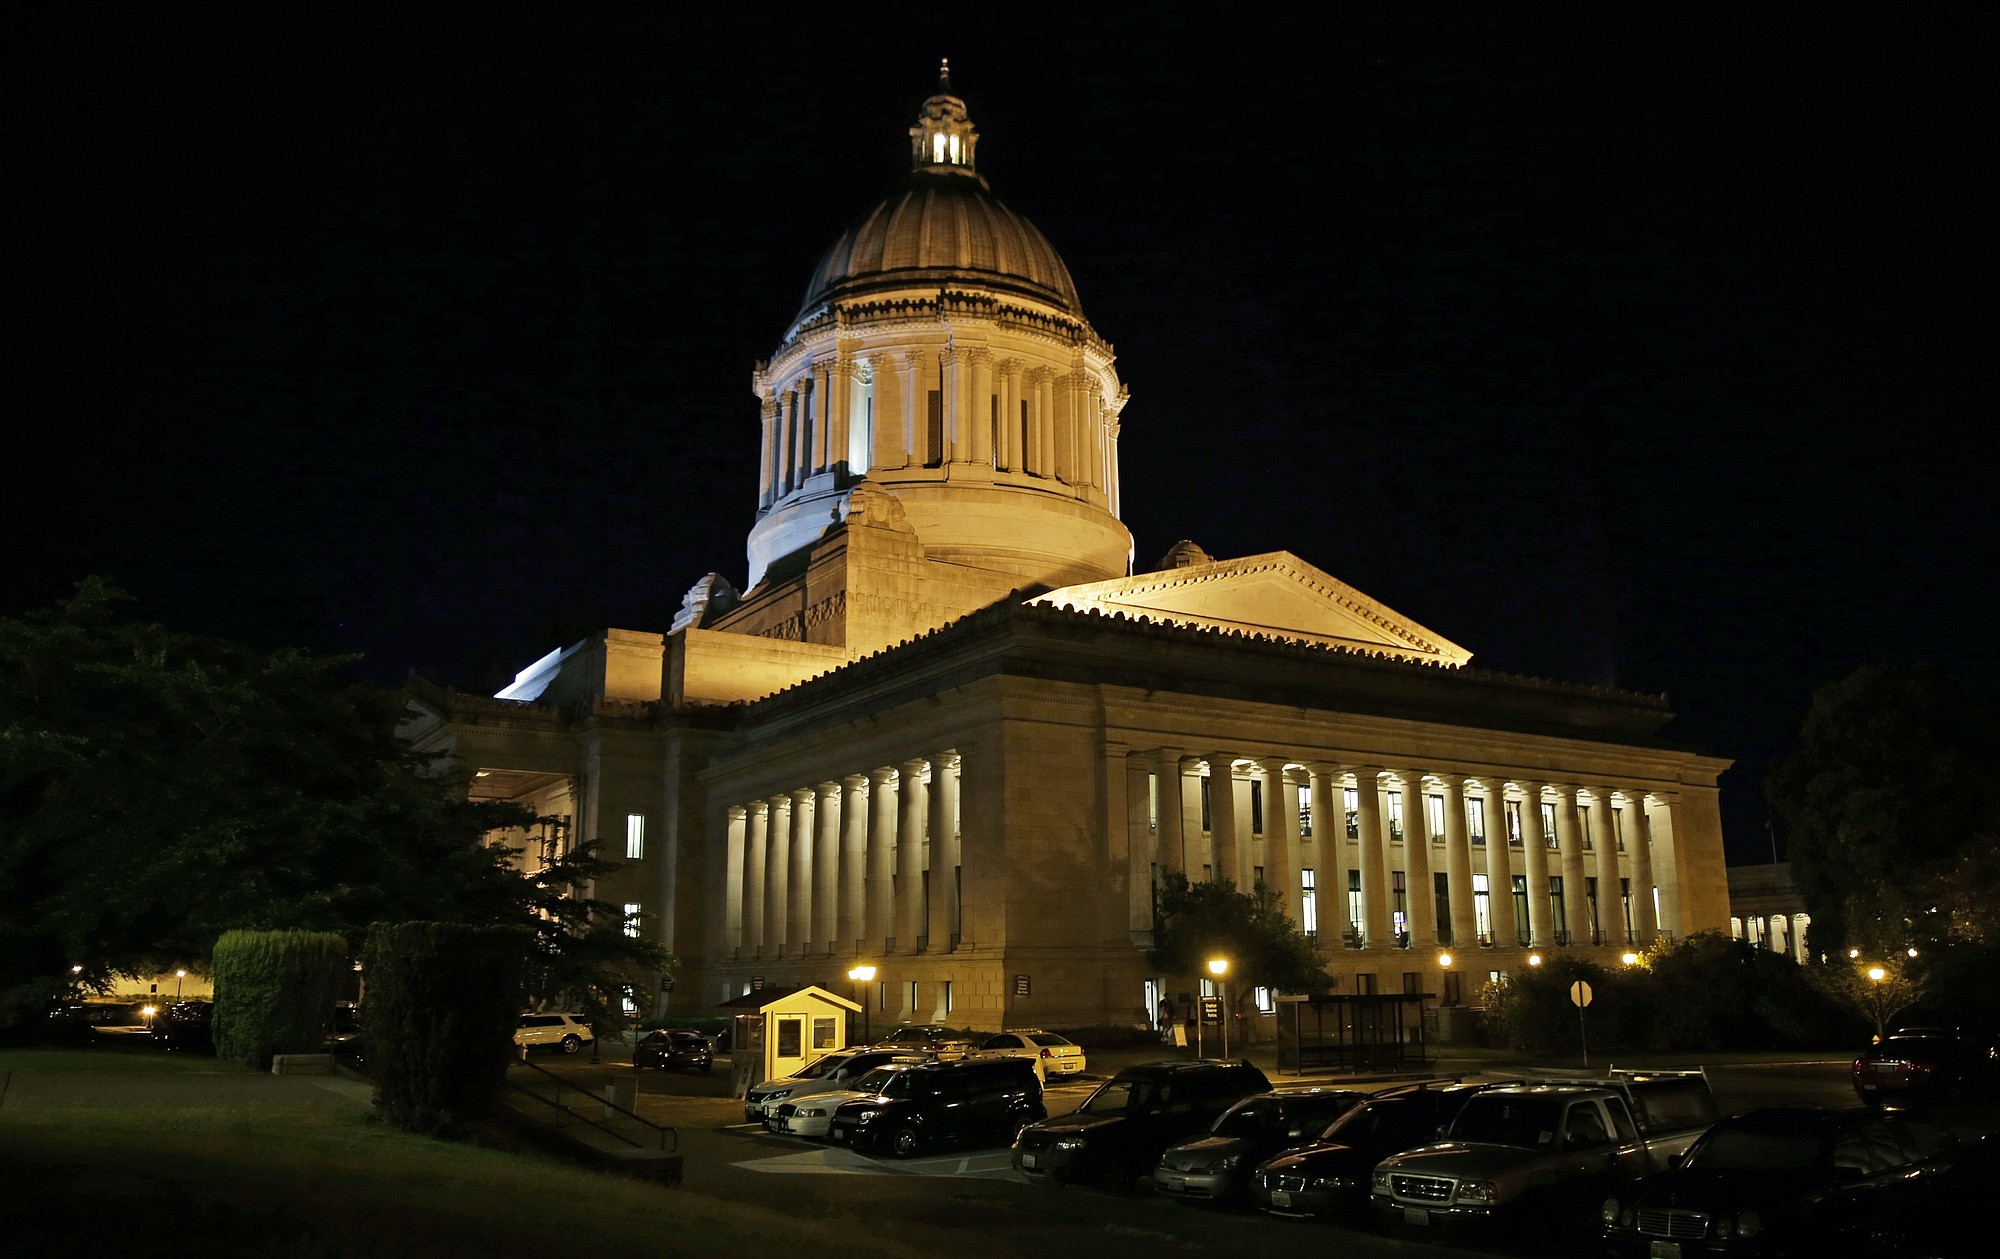 Vehicles remain parked outside the Legislative Building just after midnight, Wednesday at the Capitol in Olympia, as Tuesday's legislative session continued into the night. Washington Gov.